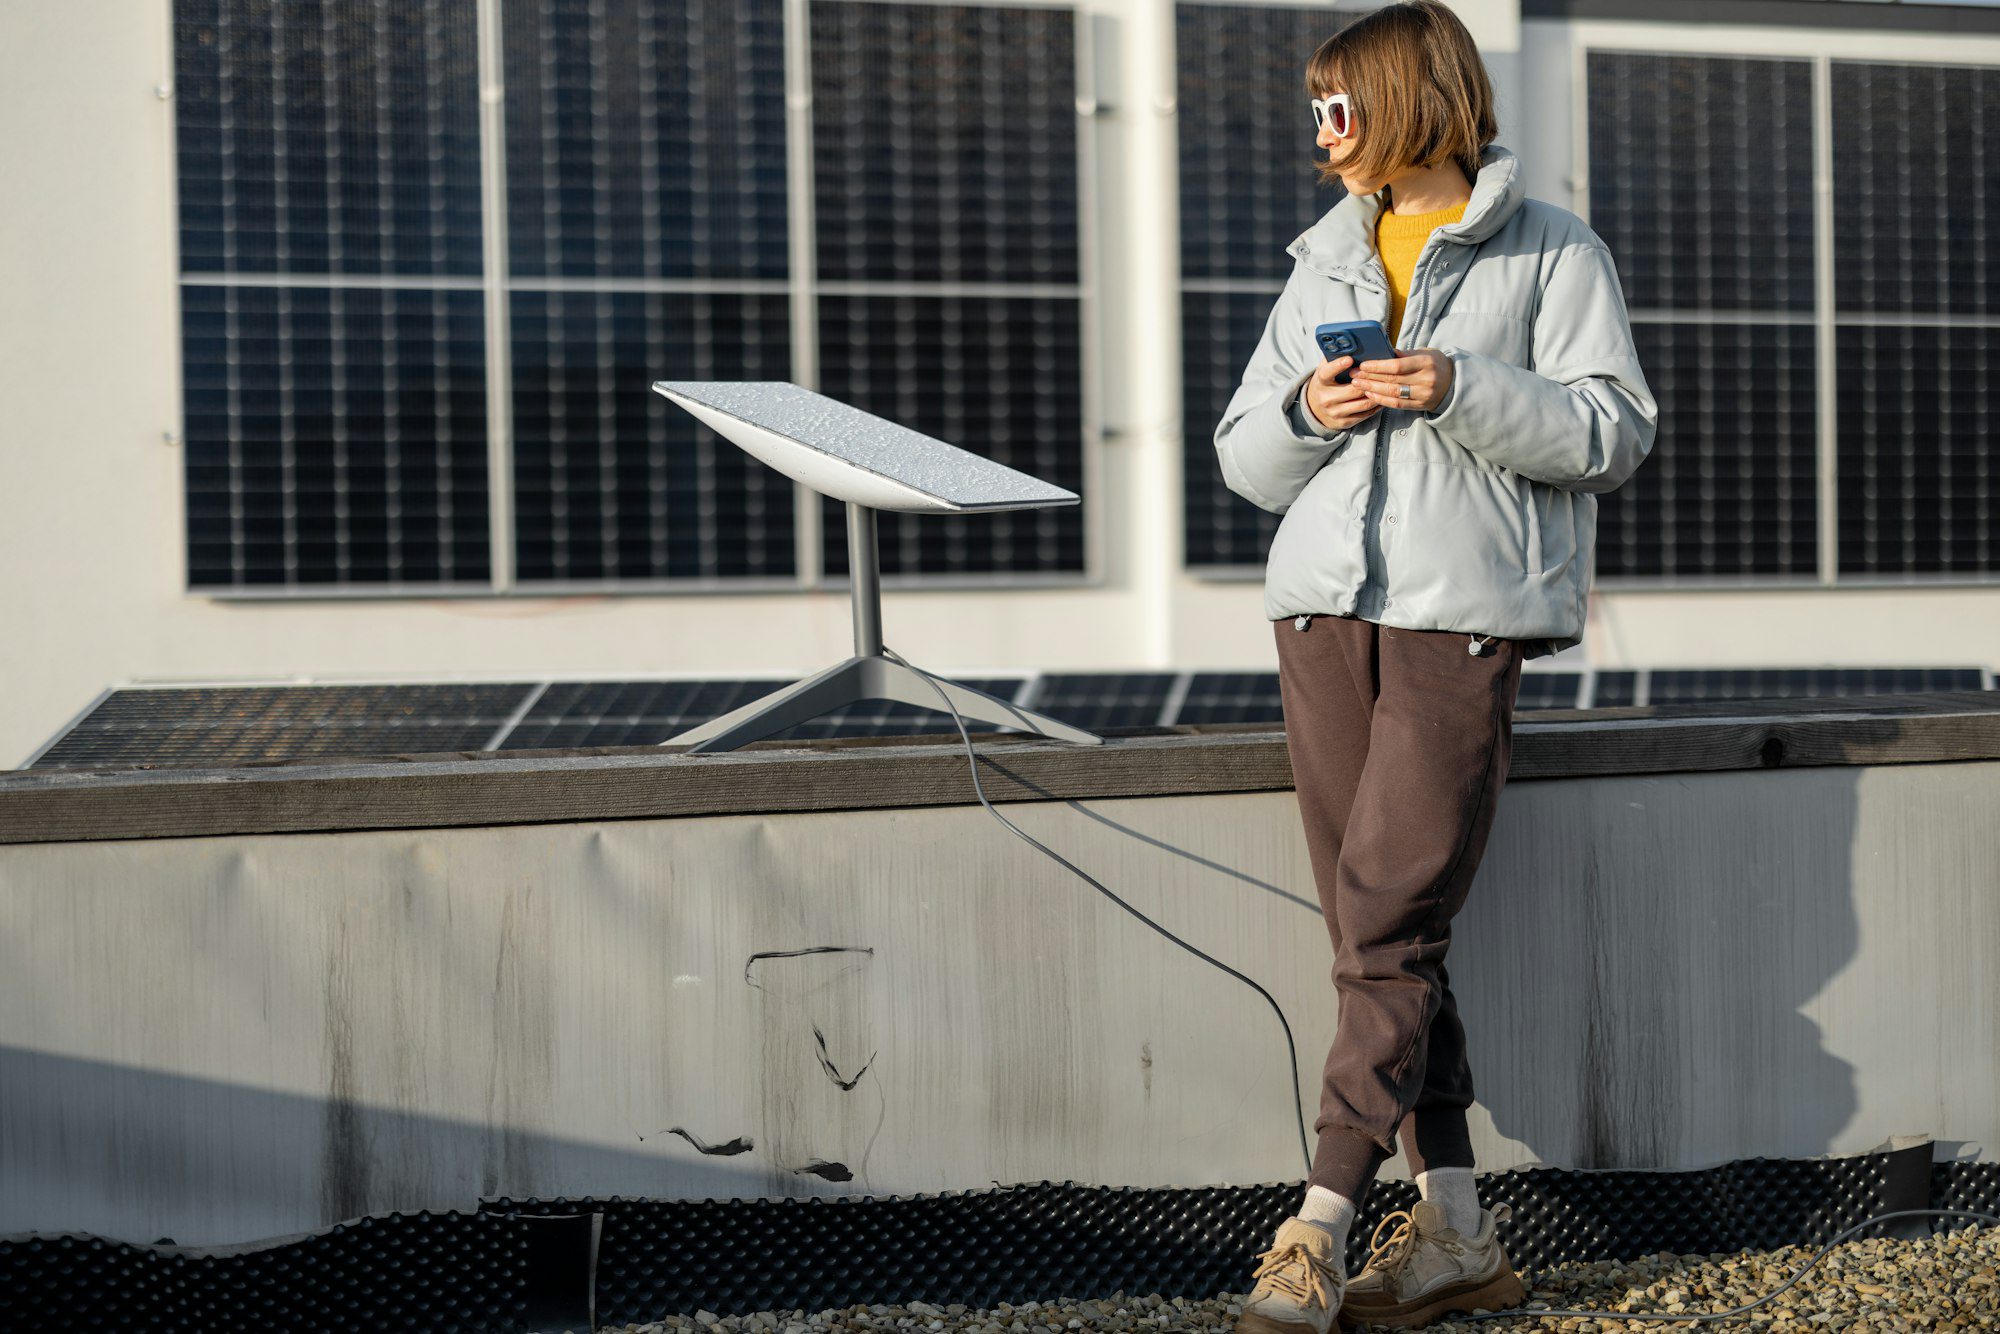 Woman uses Starlink Internet on roof with solar panels